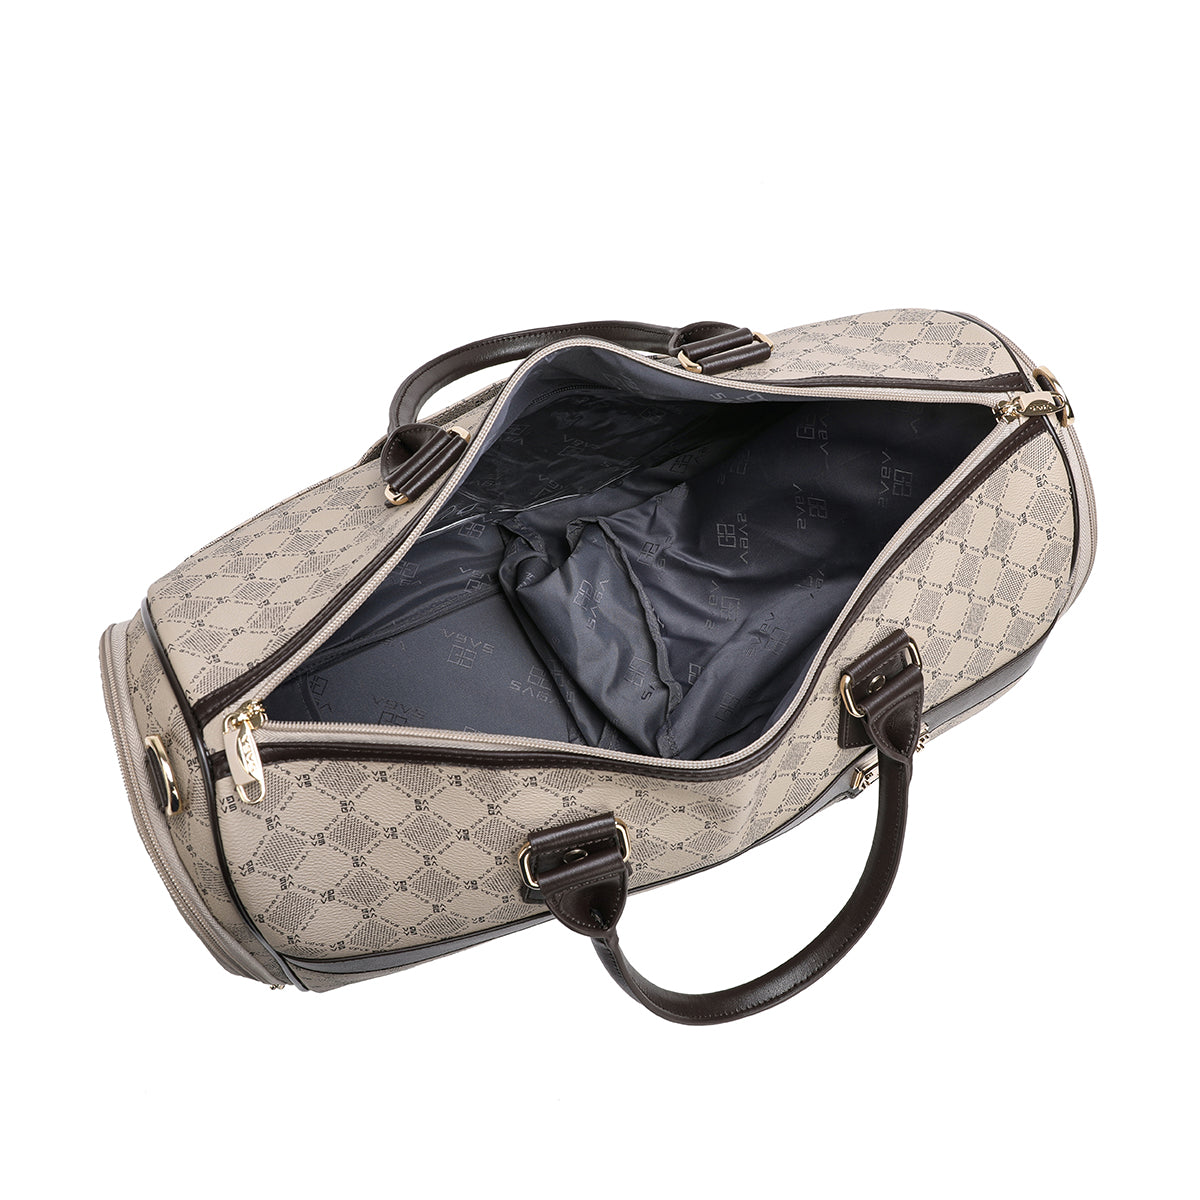 Luxurious travel bag in several sizes in khaki color